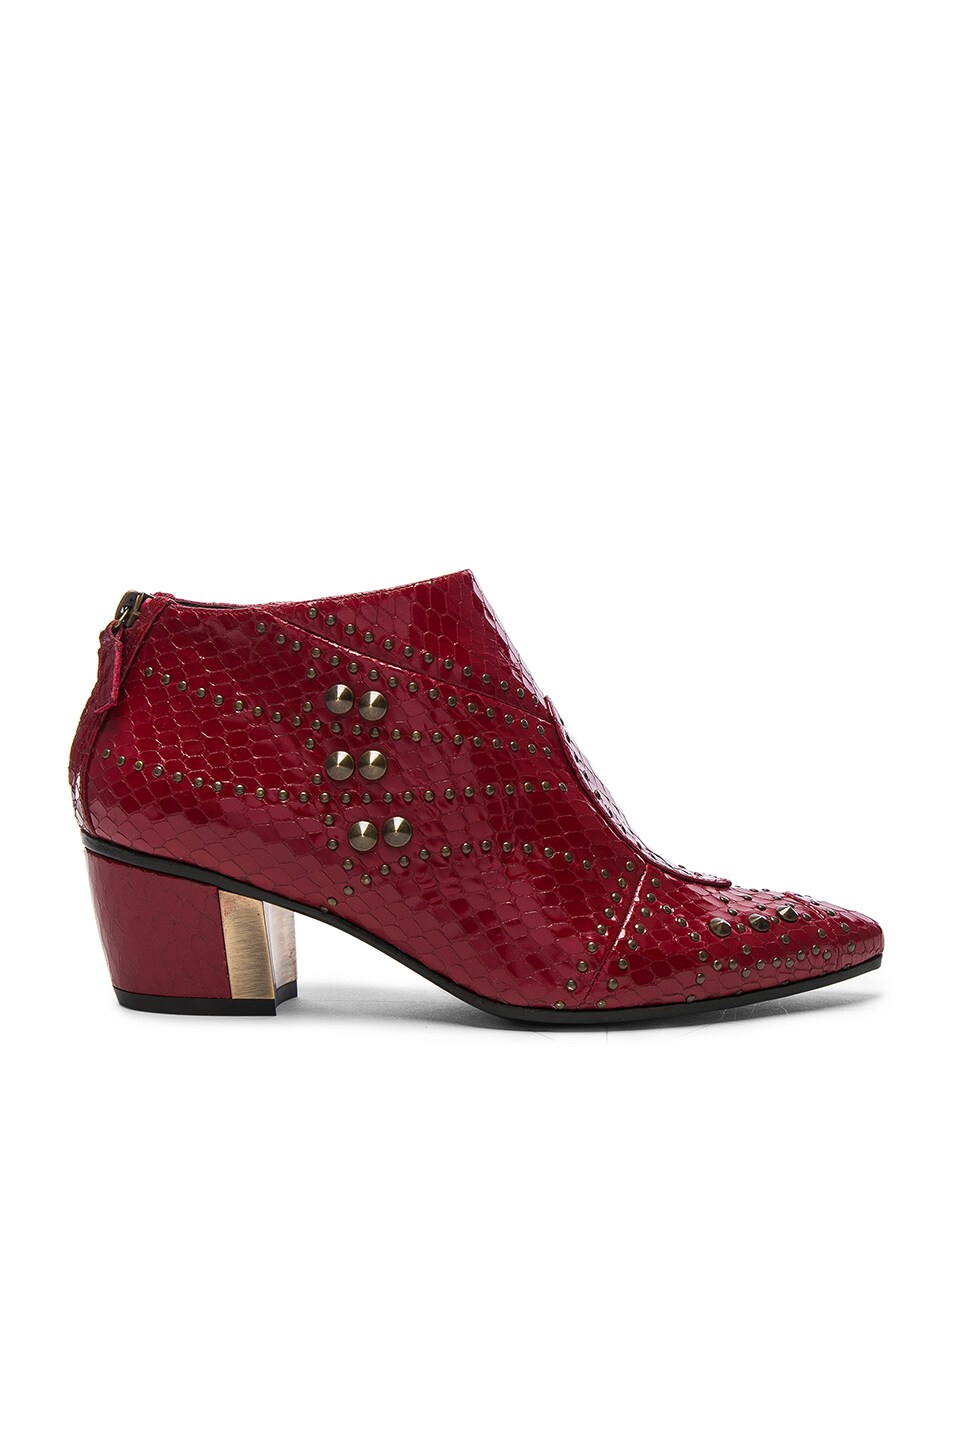 Image 1 of Rodarte Embossed Studded Leather Booties in Red